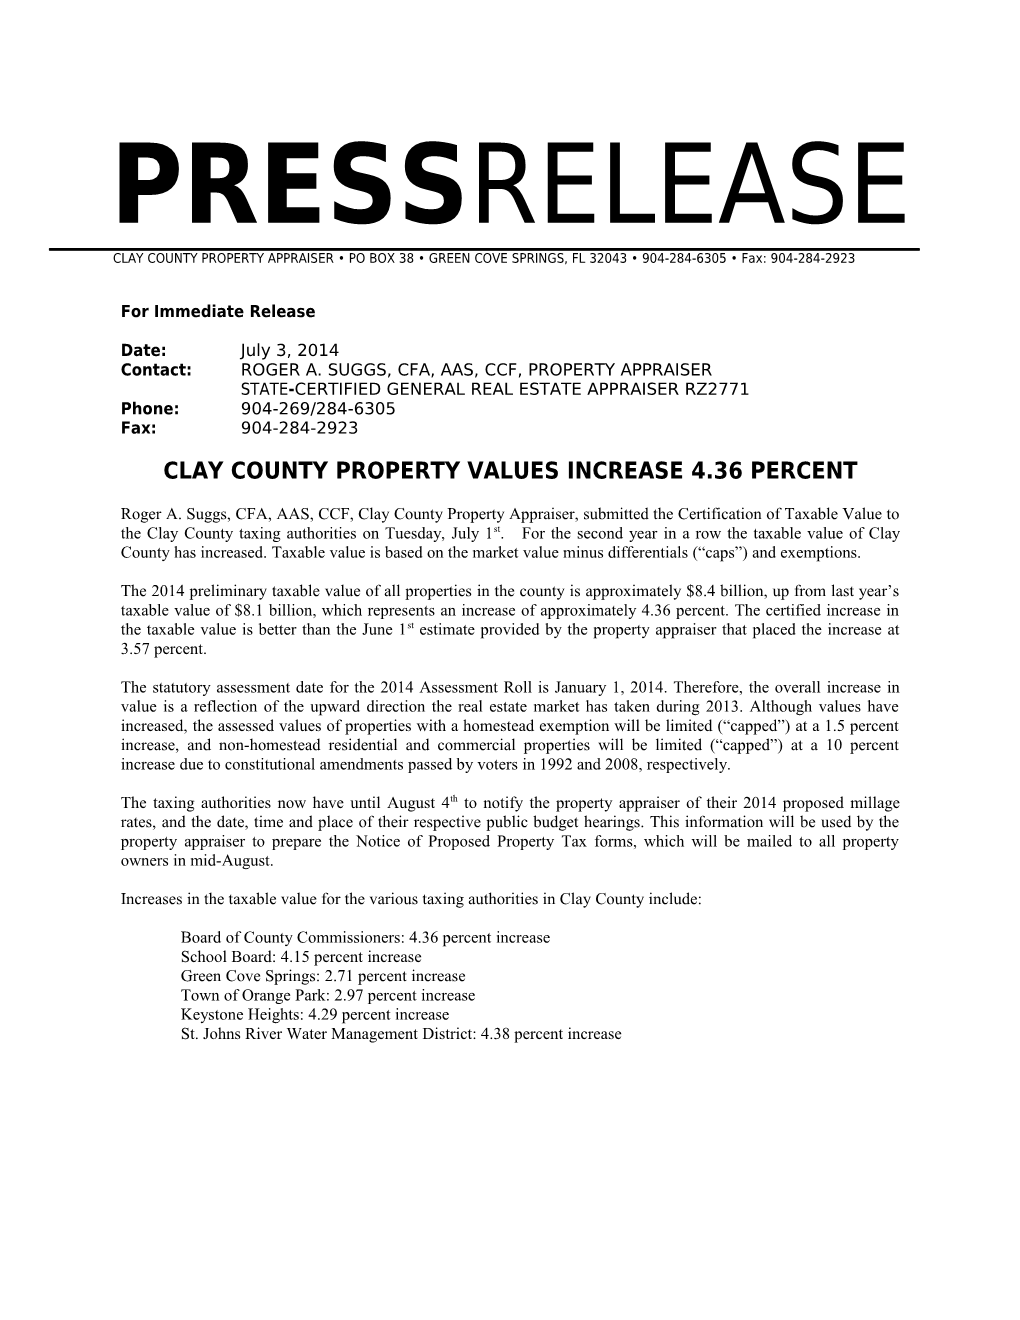 Press Release - Press Release with Bold Heading